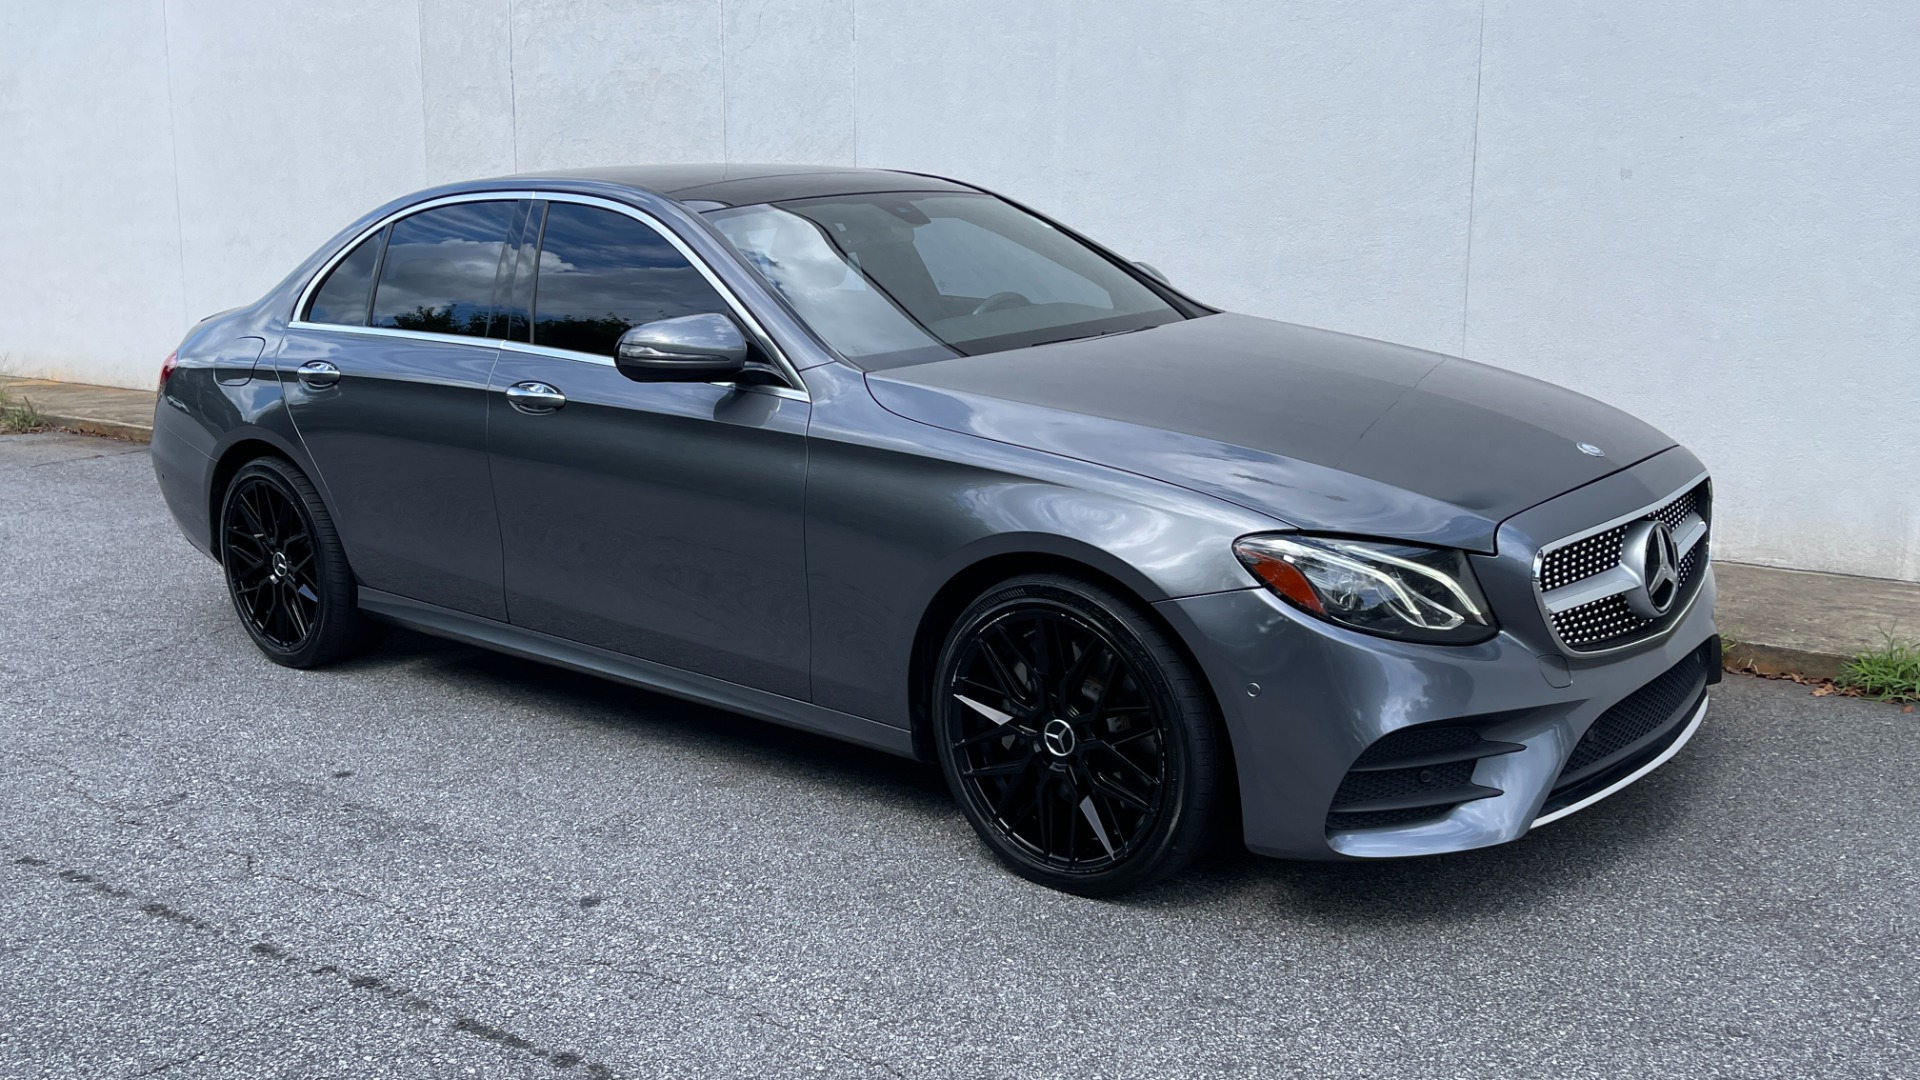 Used 2017 Mercedes-Benz E-Class E300 LUXURY / UPGRADED WHEELS / SPORT WHEEL / PREMIUM 1 / BURMESTER AUDIO for sale Sold at Formula Imports in Charlotte NC 28227 2